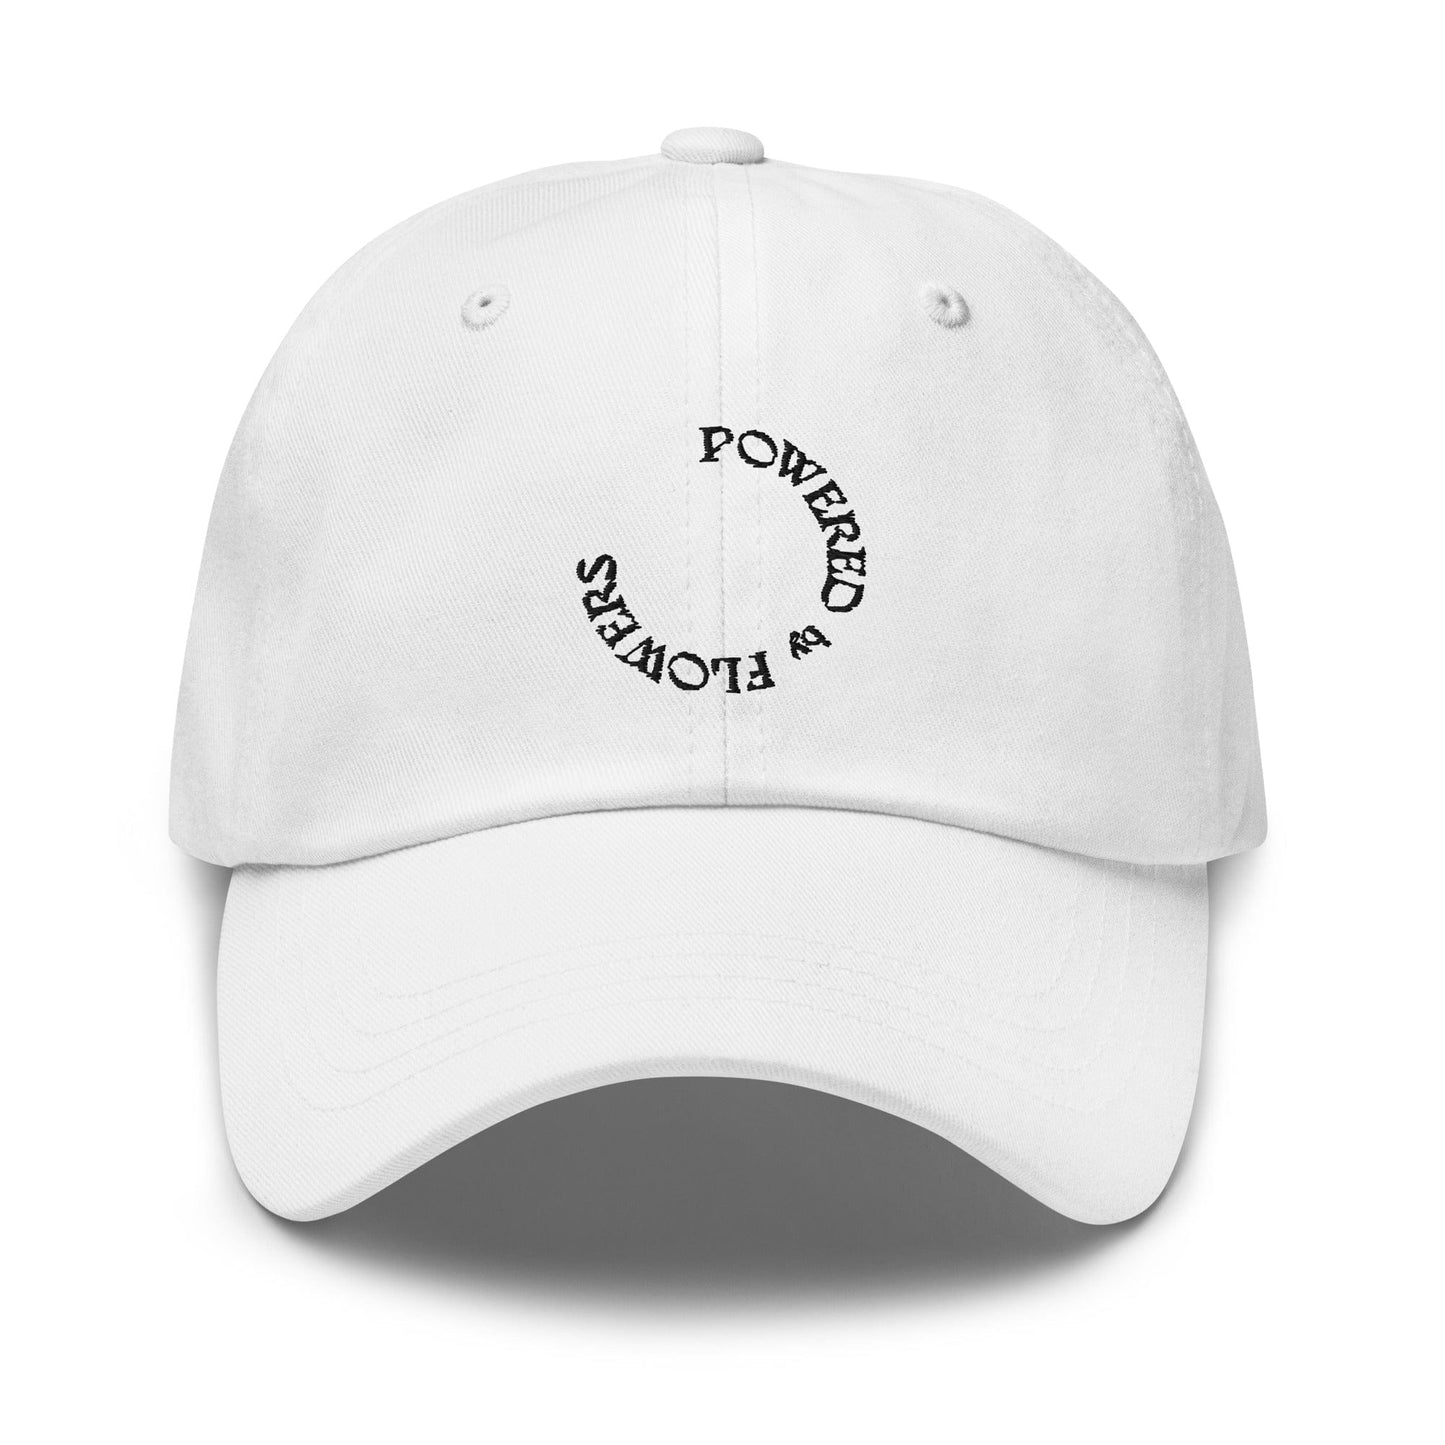 Powered by Flowers Hat - Black Lettering